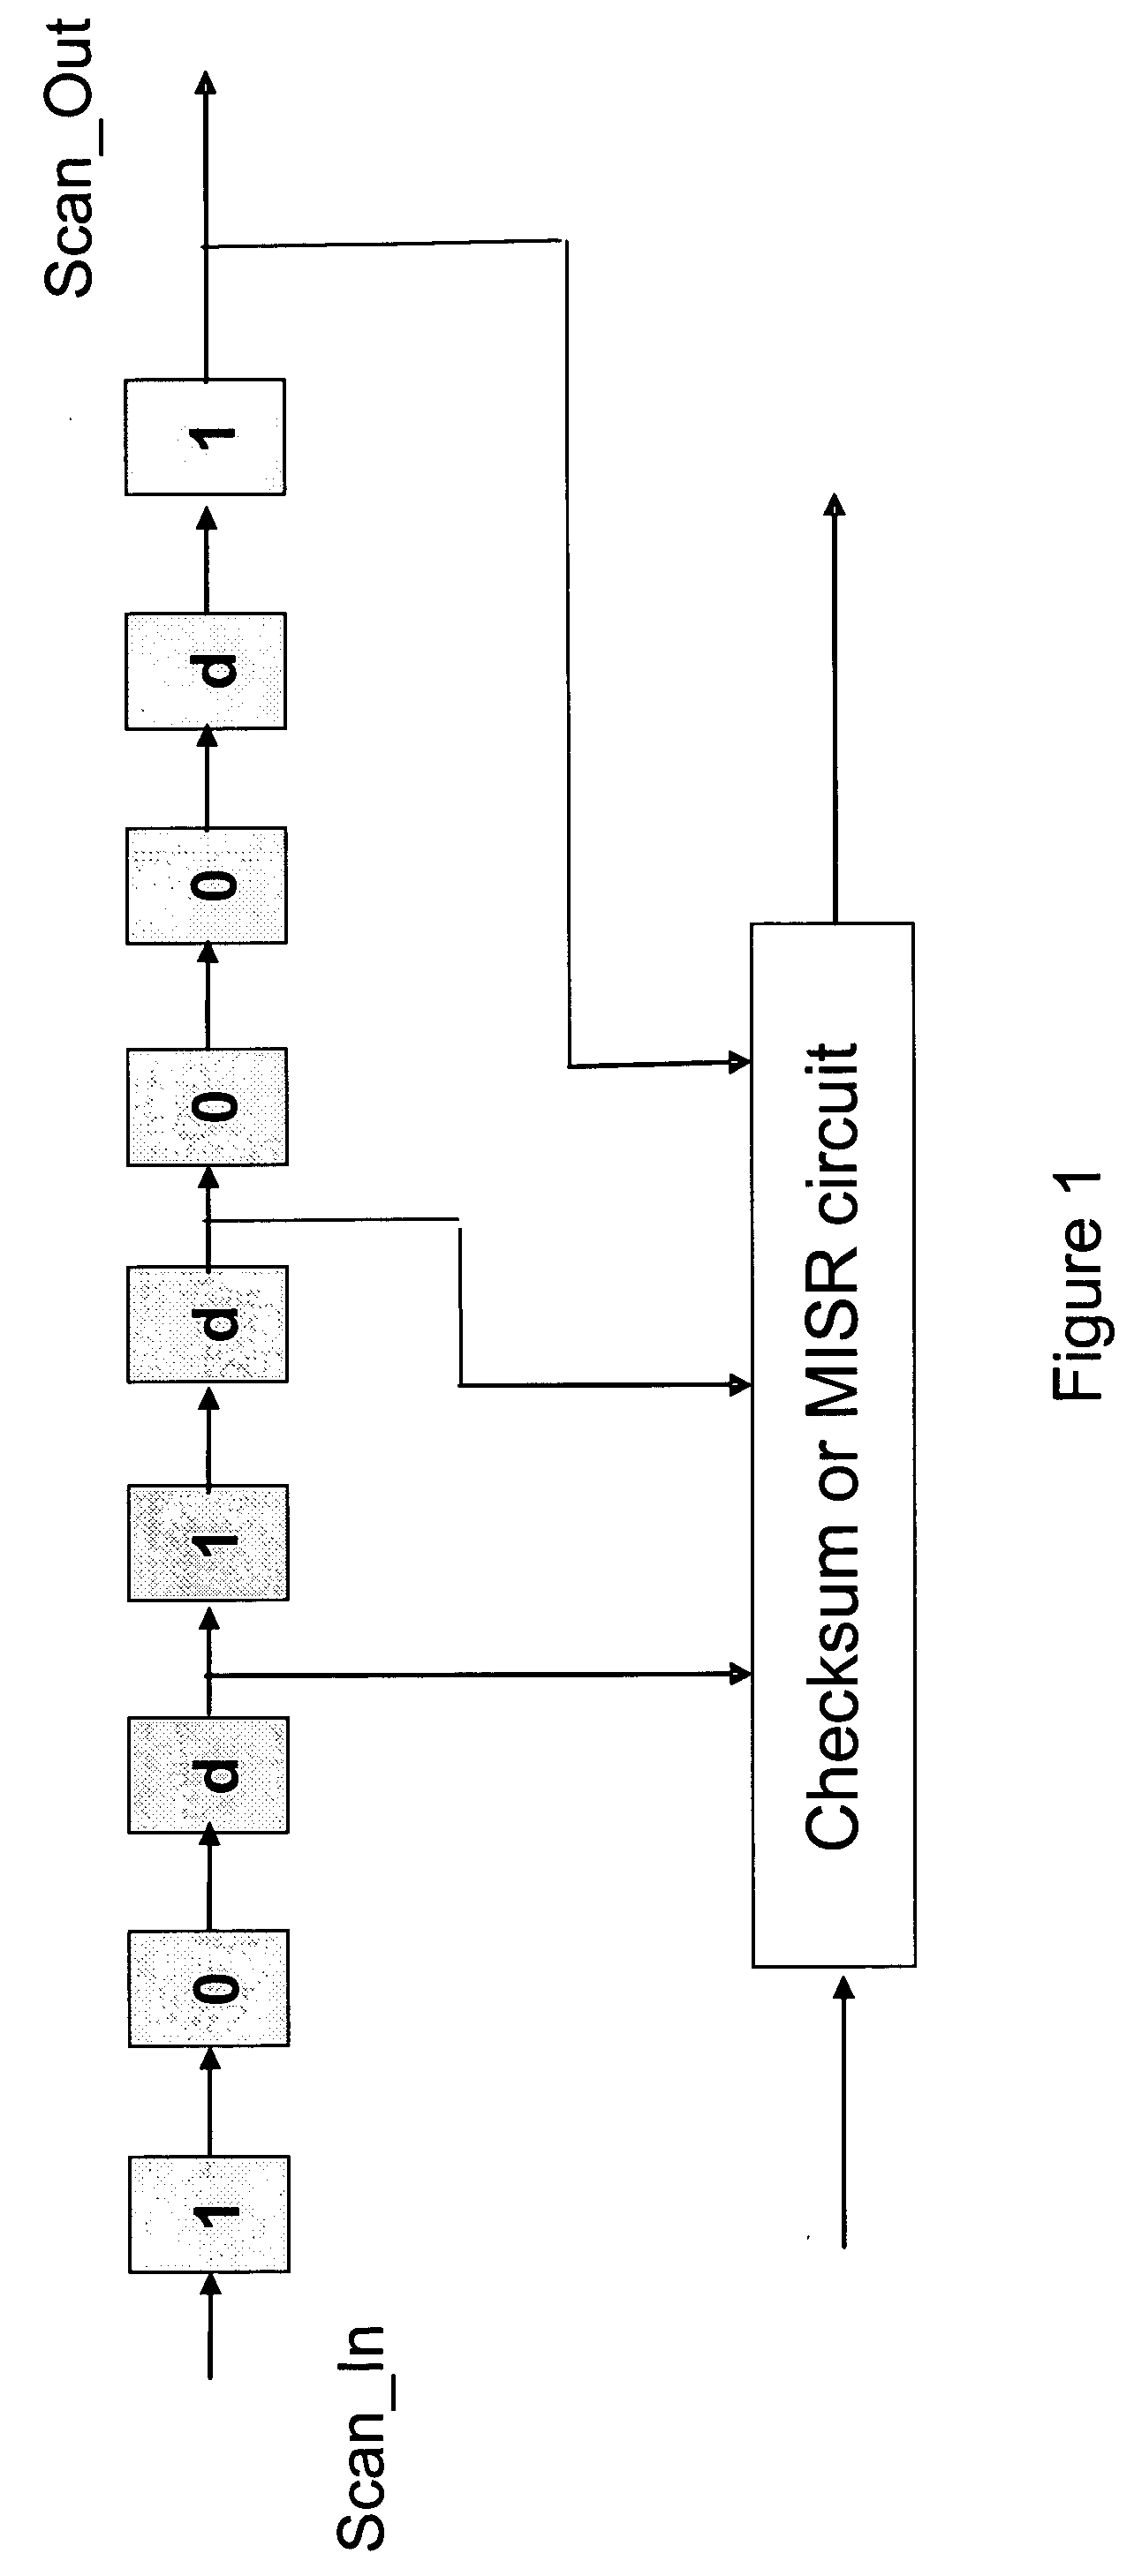 Accelerated scan circuitry and method for reducing scan test data volume and execution time